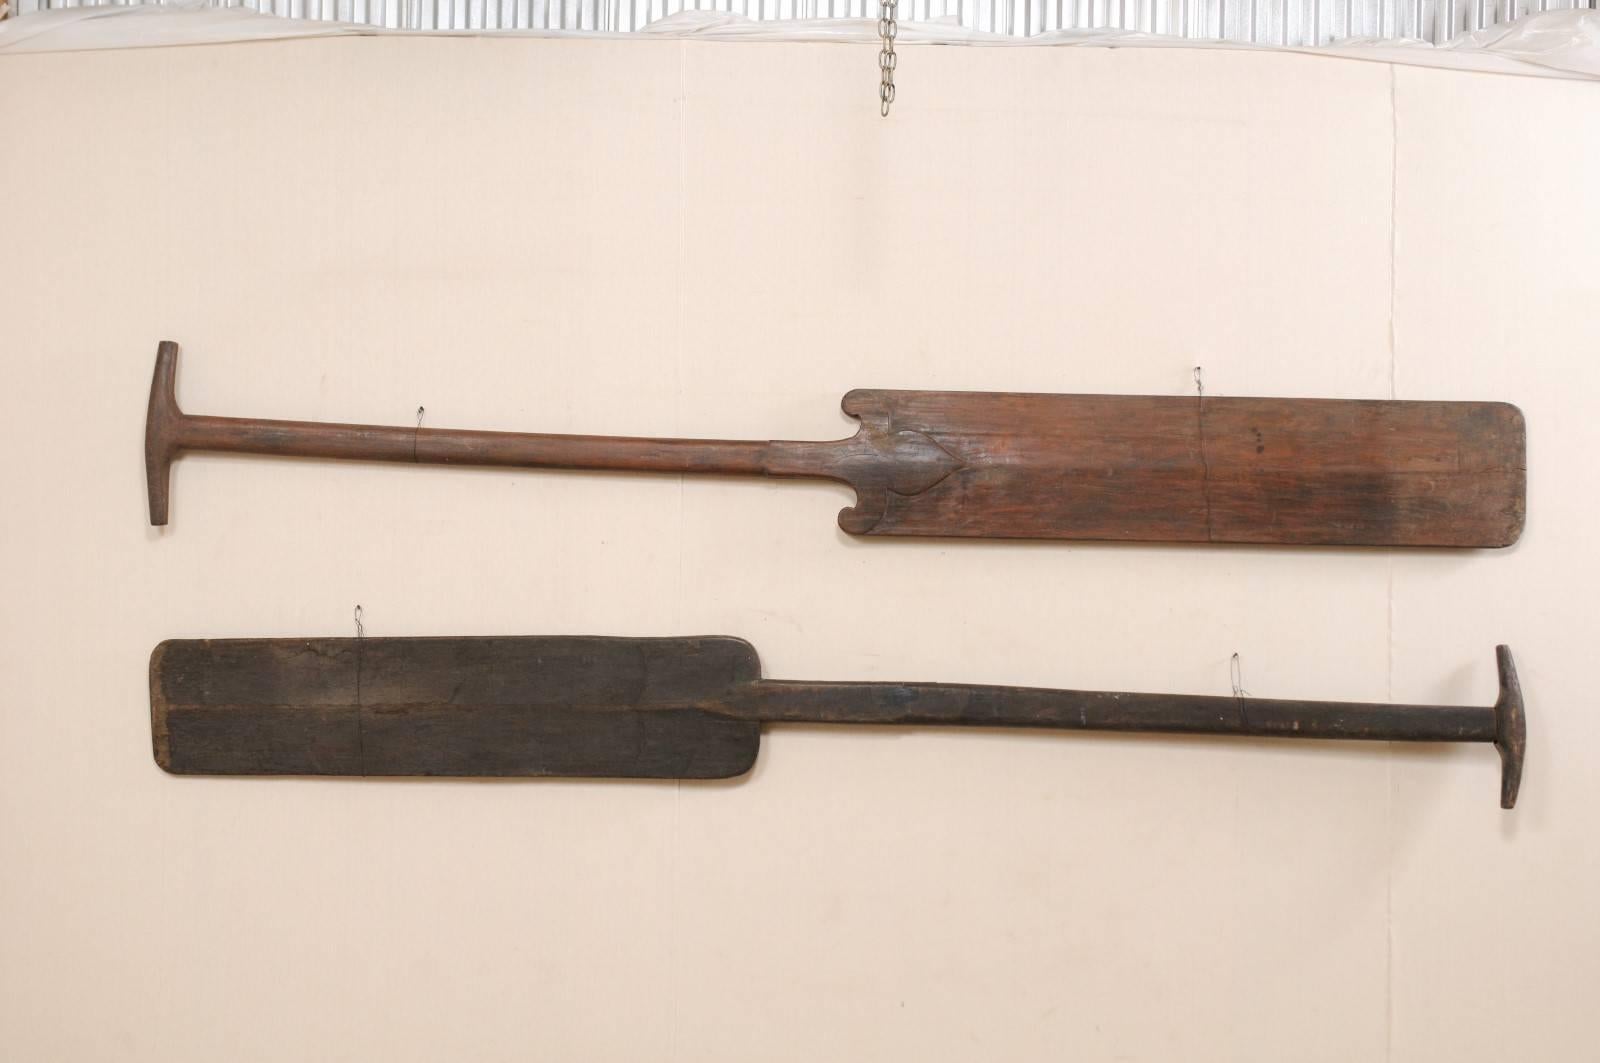 A pair of large-sized South Indian (Kerala) wooden boat steering paddles from the mid-20th century. This pair of hand-carved boat oars from Kerala are an impressive 11+ feet in length. The paddles have as a beautiful salt water patina and lovely